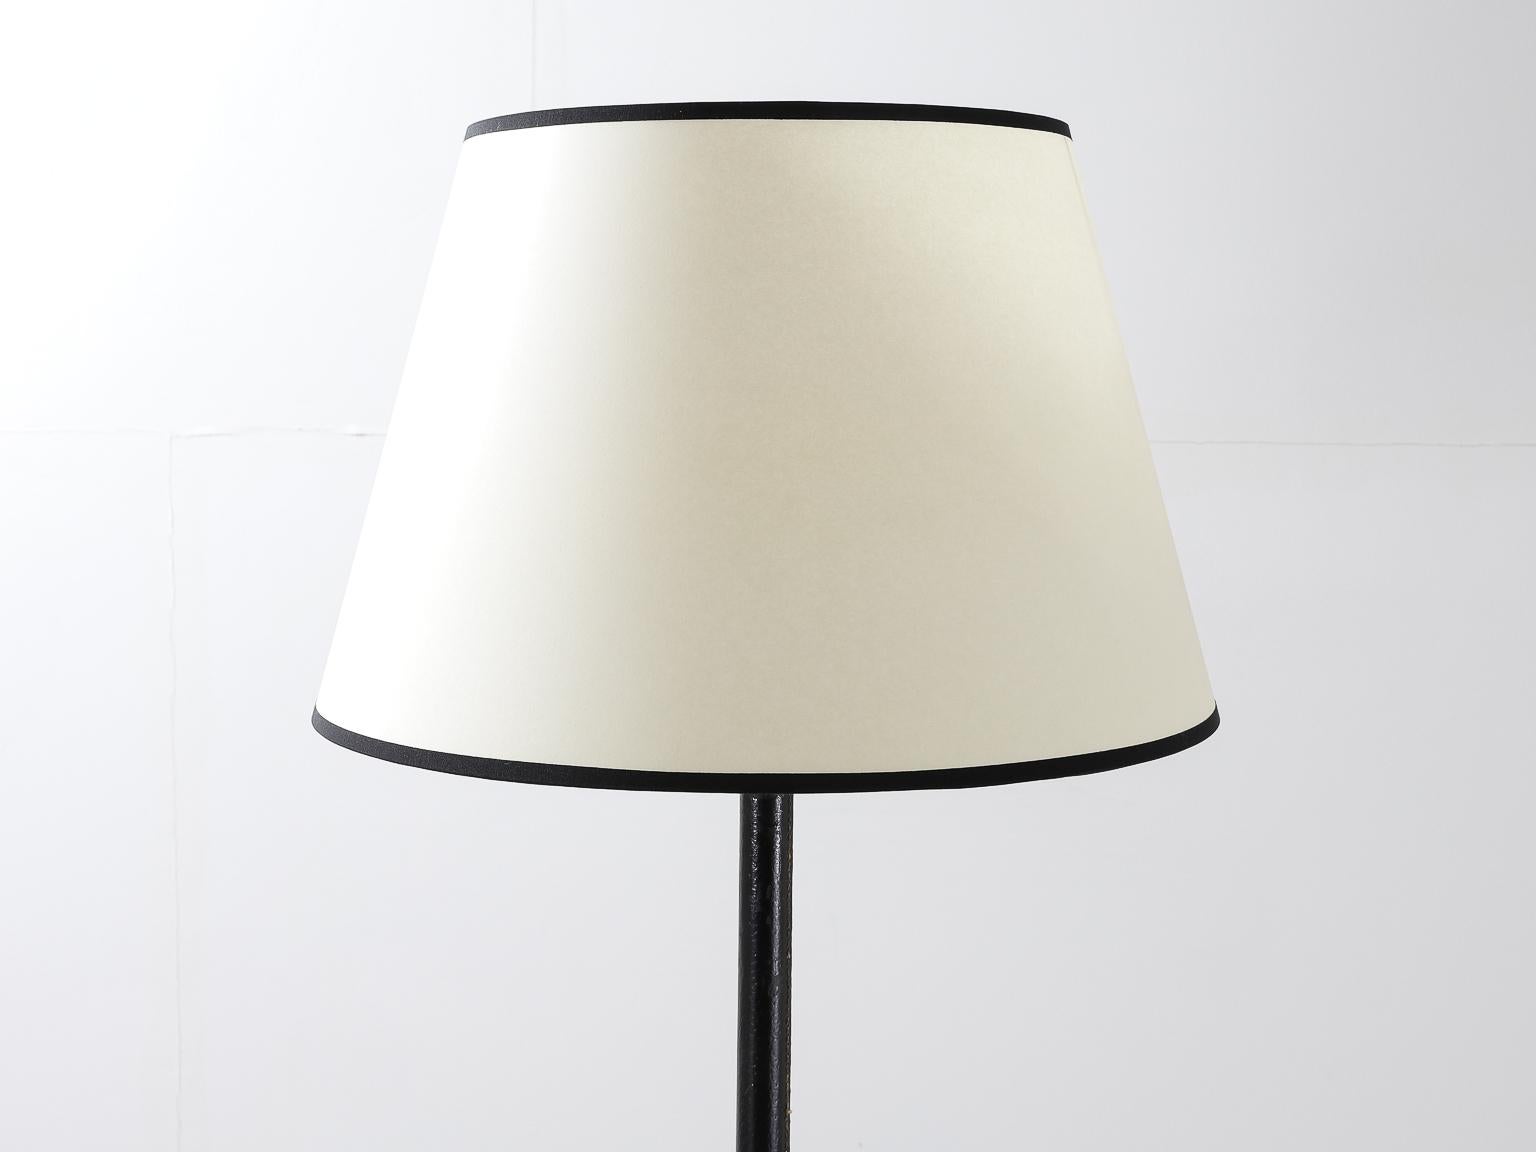 French Mid-Century Modern handstitched leather and brass floor lamp attributed to Jacques Adnet.